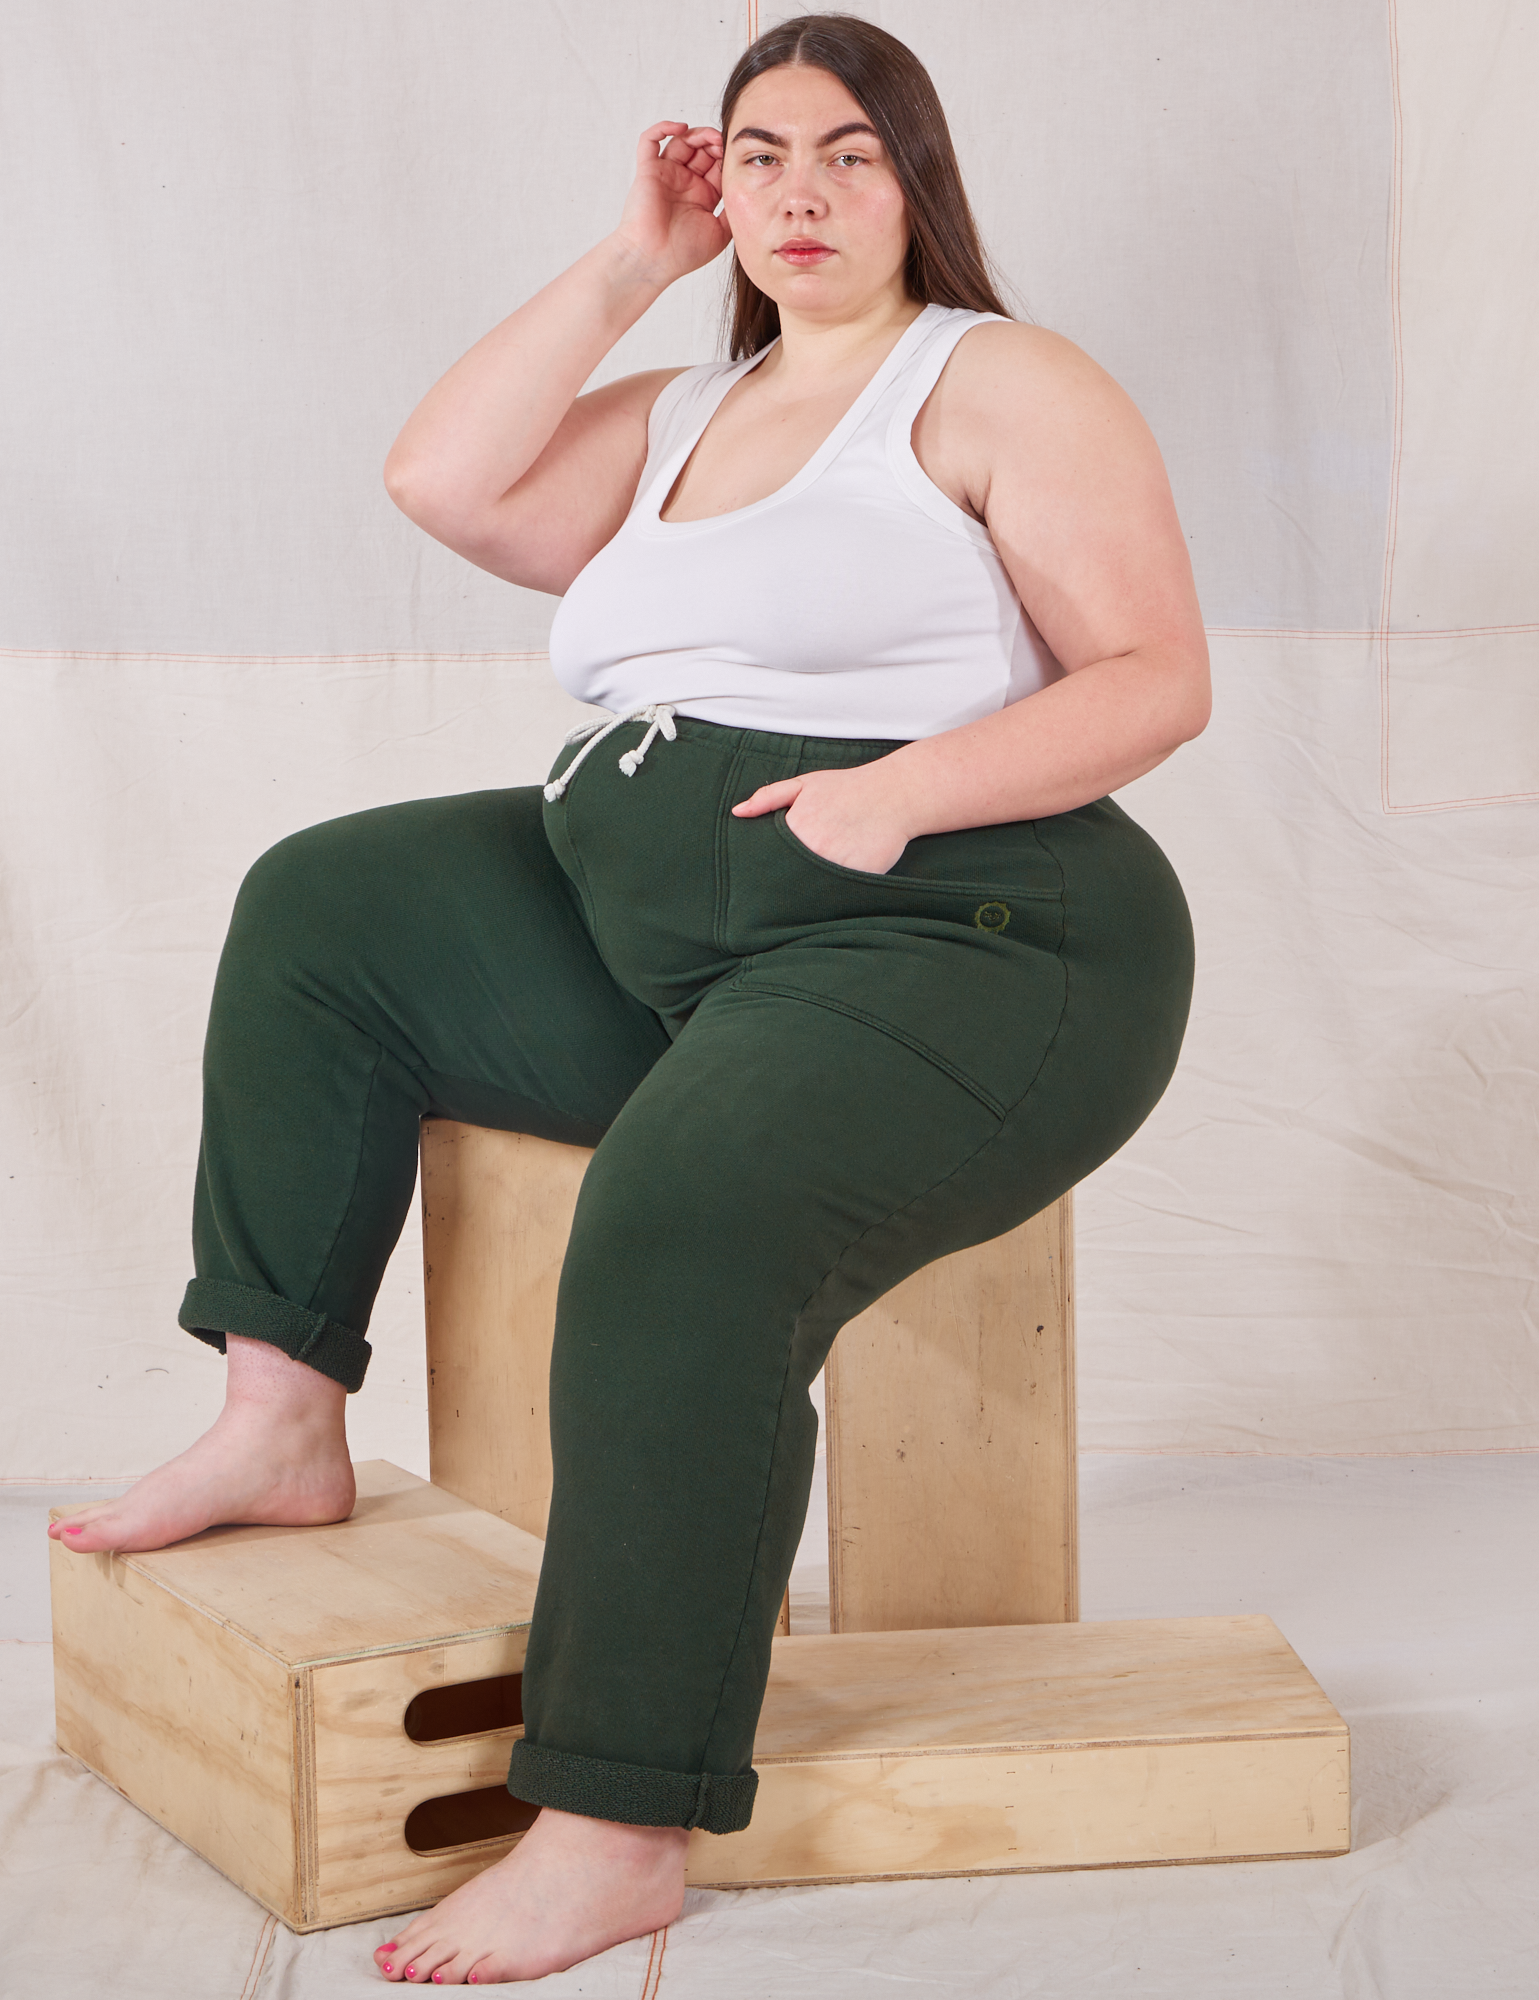 Marielena is wearing Rolled Cuff Sweat Pants in Swamp Green paired with Cropped Tank in vintage tee off-white